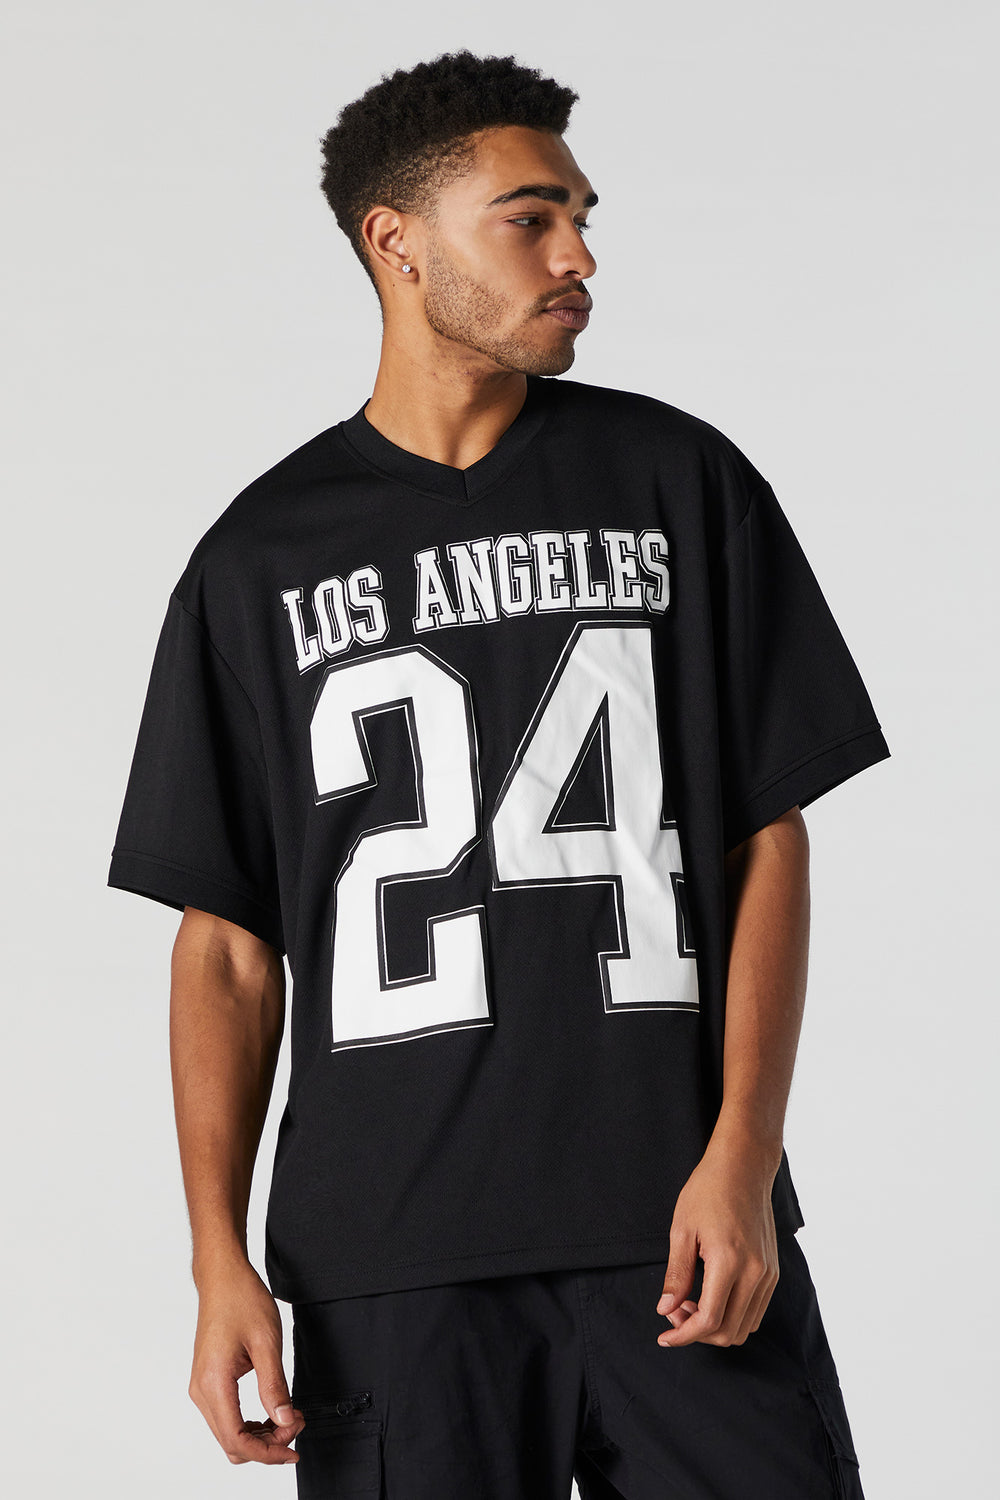 Los Angeles 24 Graphic Jersey Los Angeles 24 Graphic Jersey 1